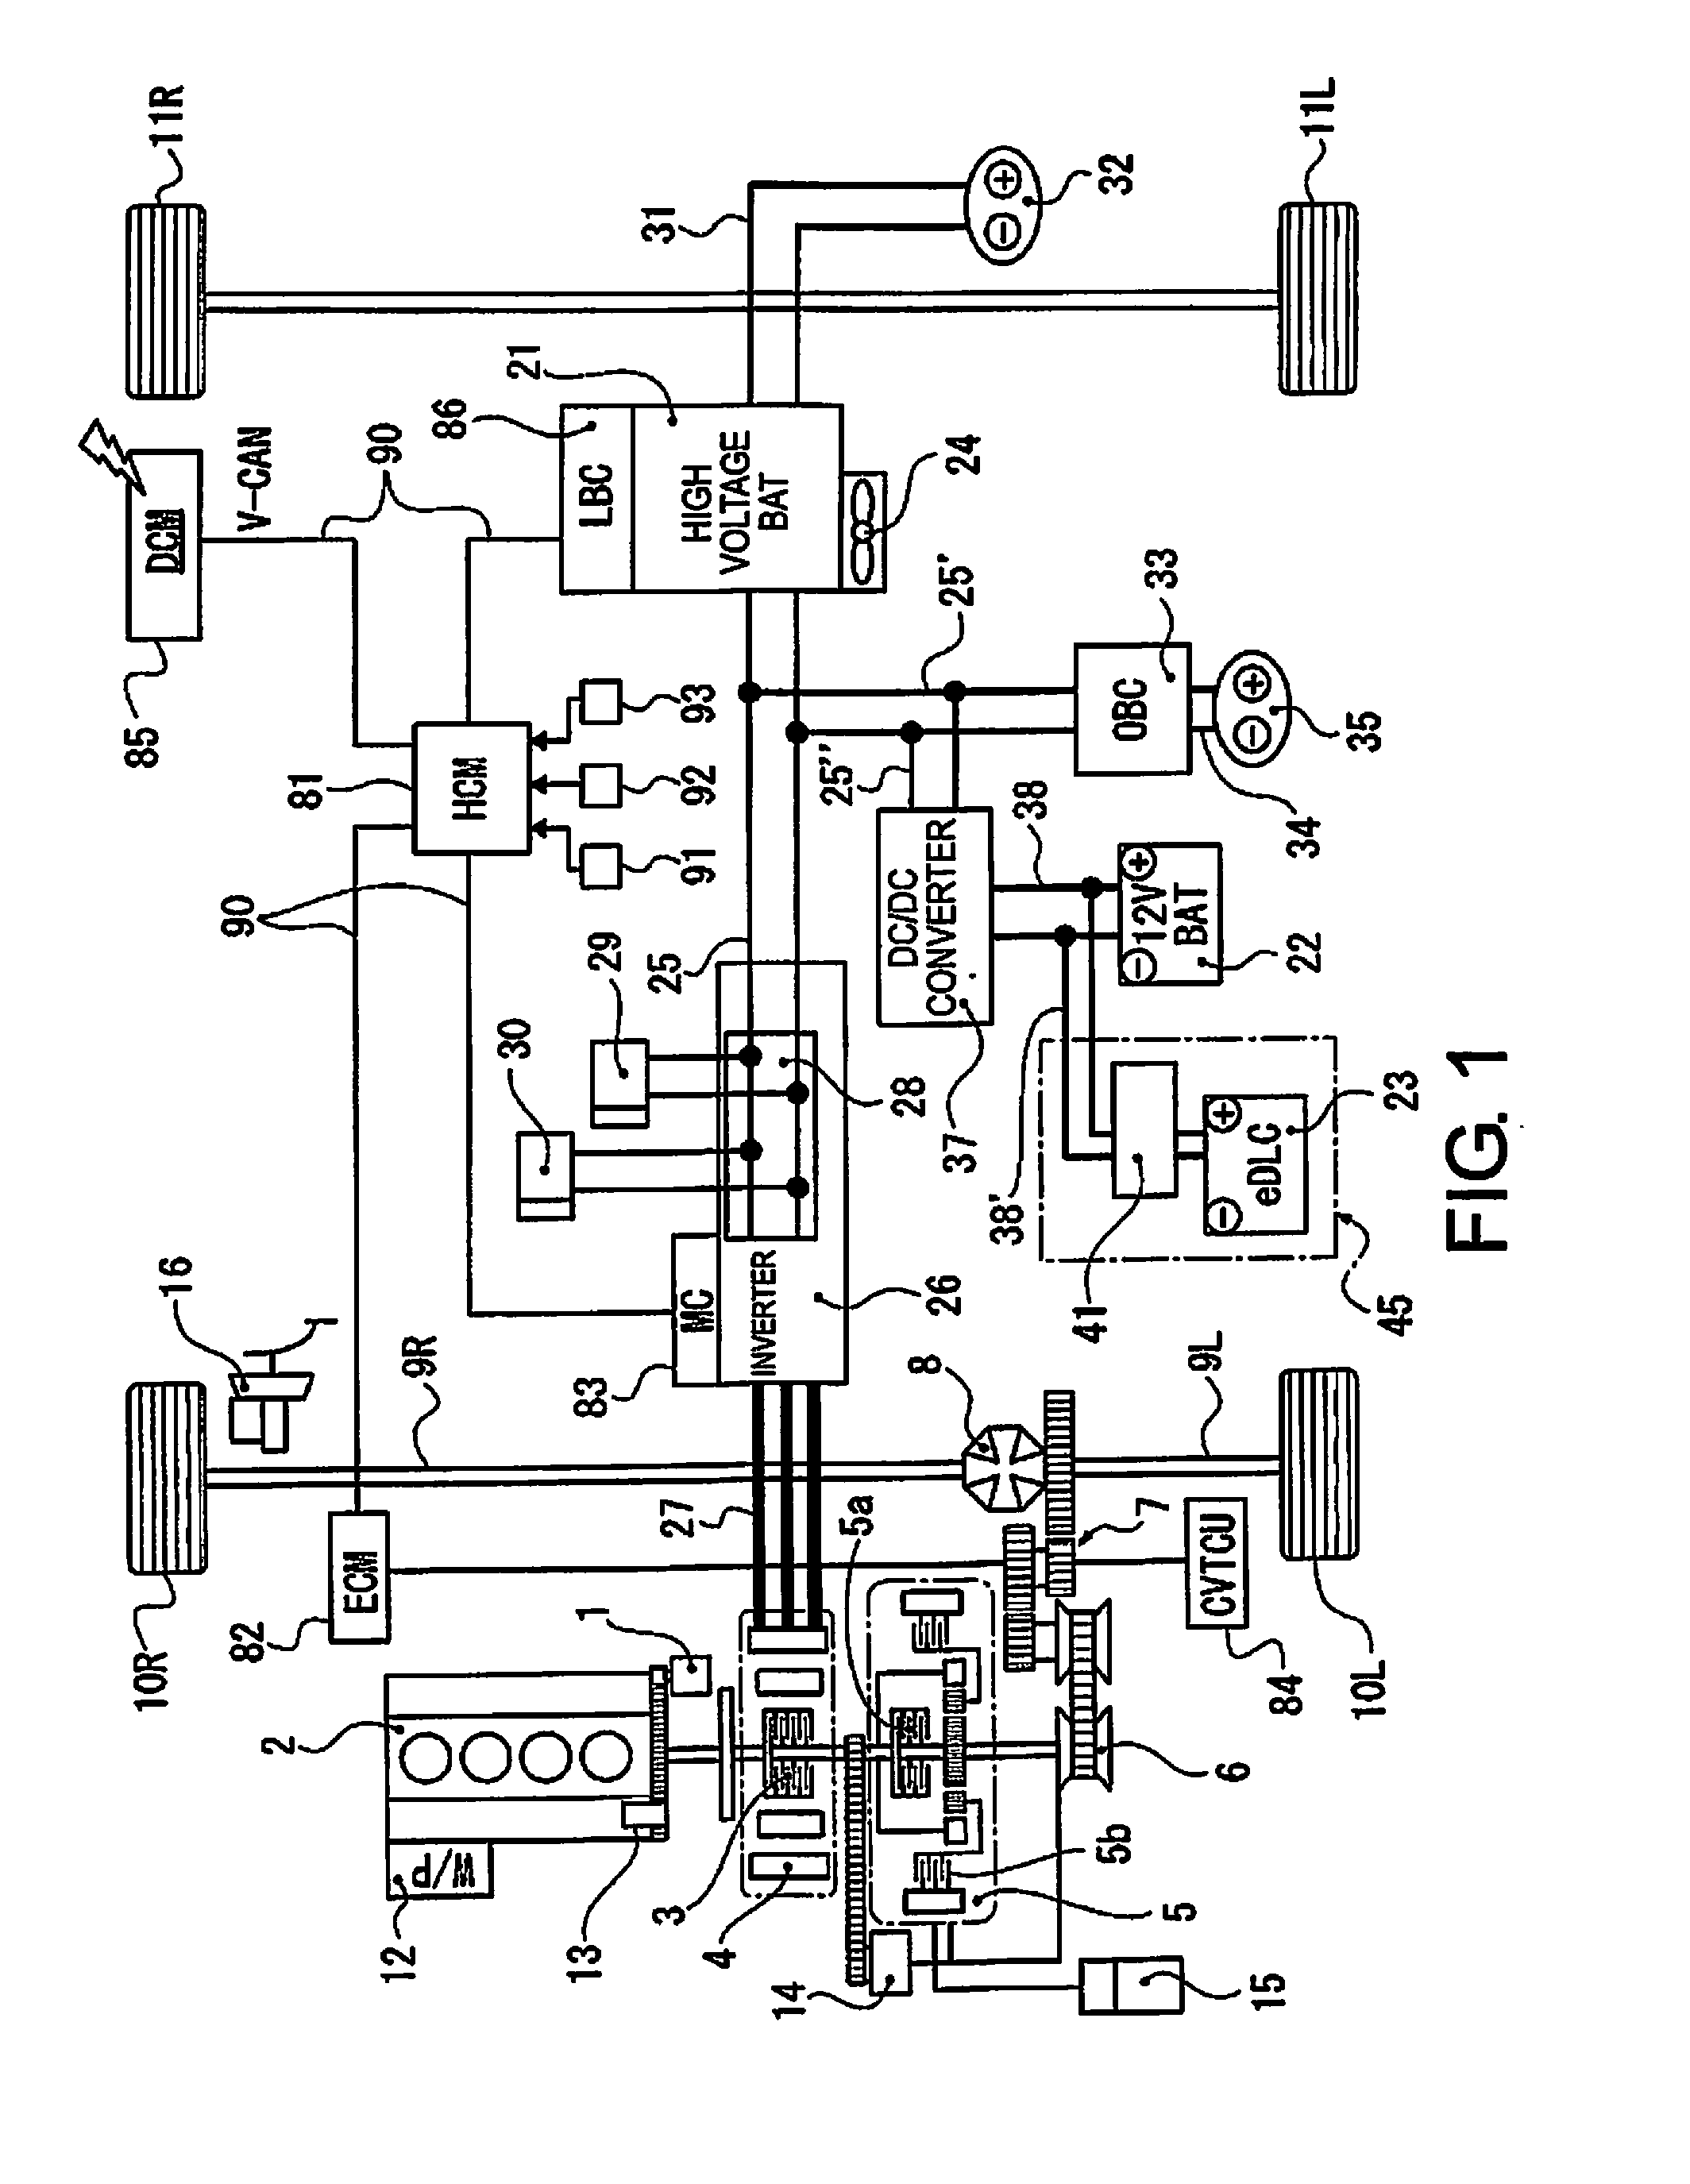 Control system for a plug-in hybrid vehicle